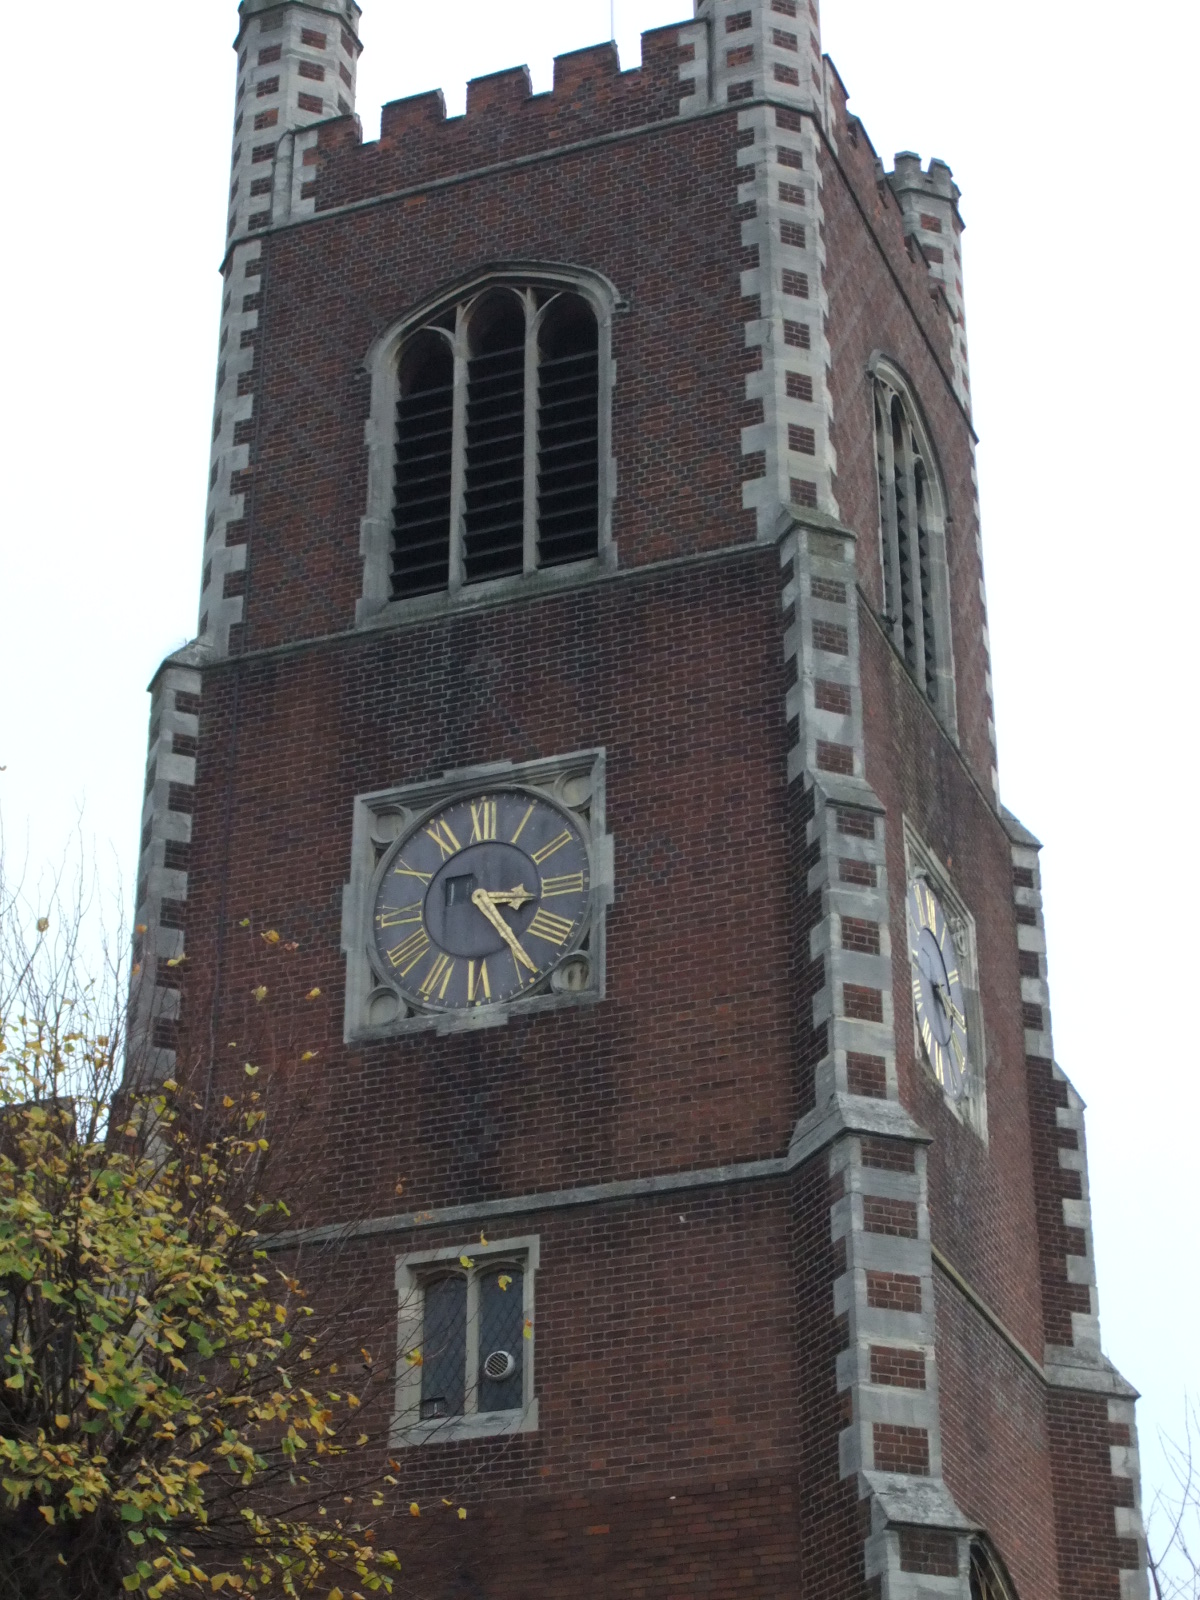 a brick clock tower is shown with two clocks